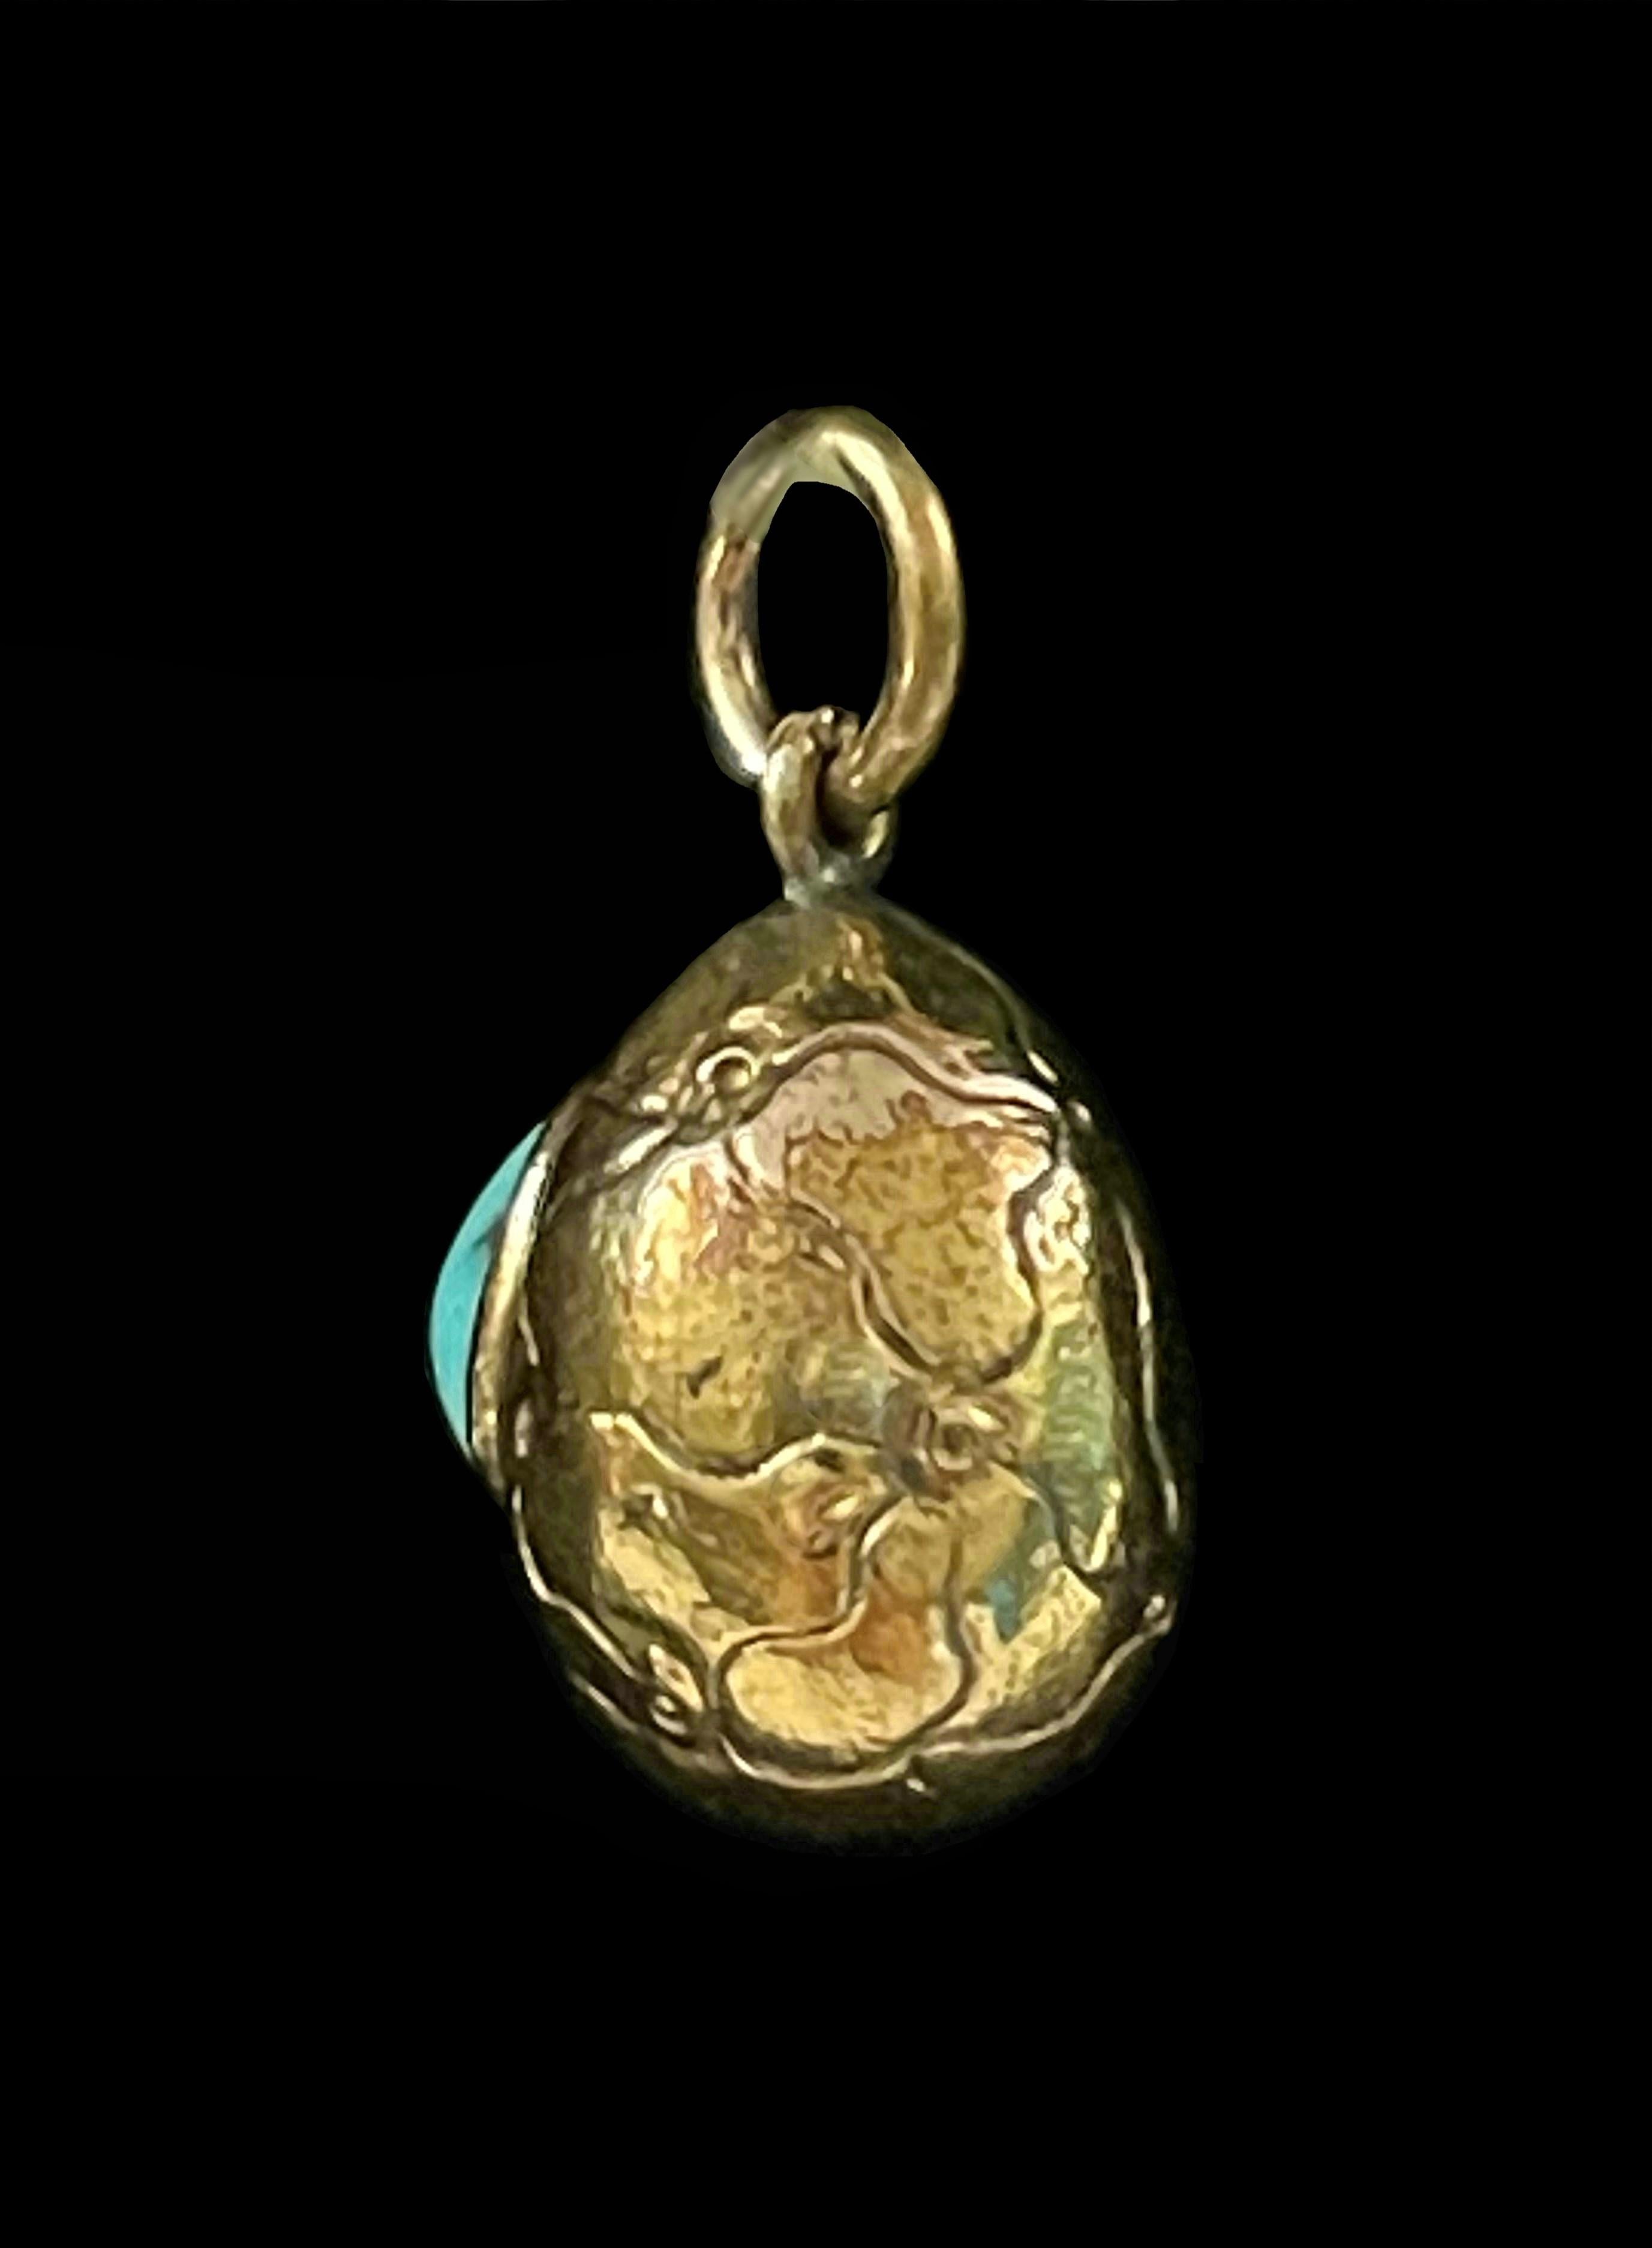 Antique 14K Yellow Gold & Persian Turquoise Egg Pendant - Early 20th Century For Sale 1